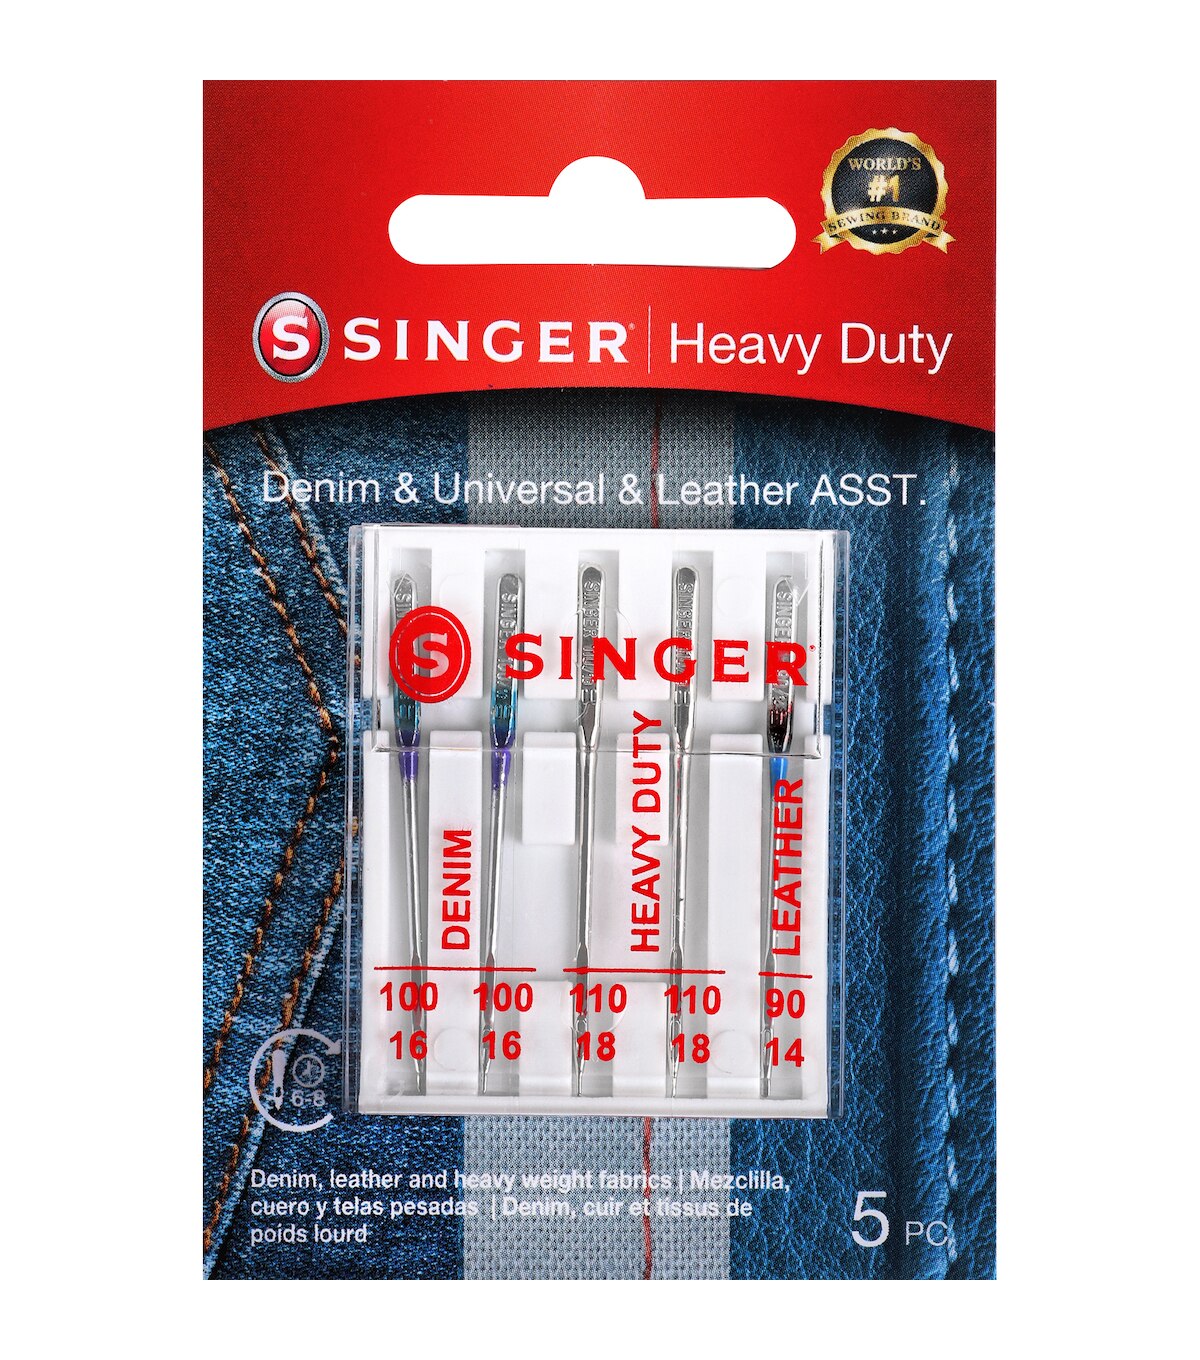 Singer Sewing Needle Chart